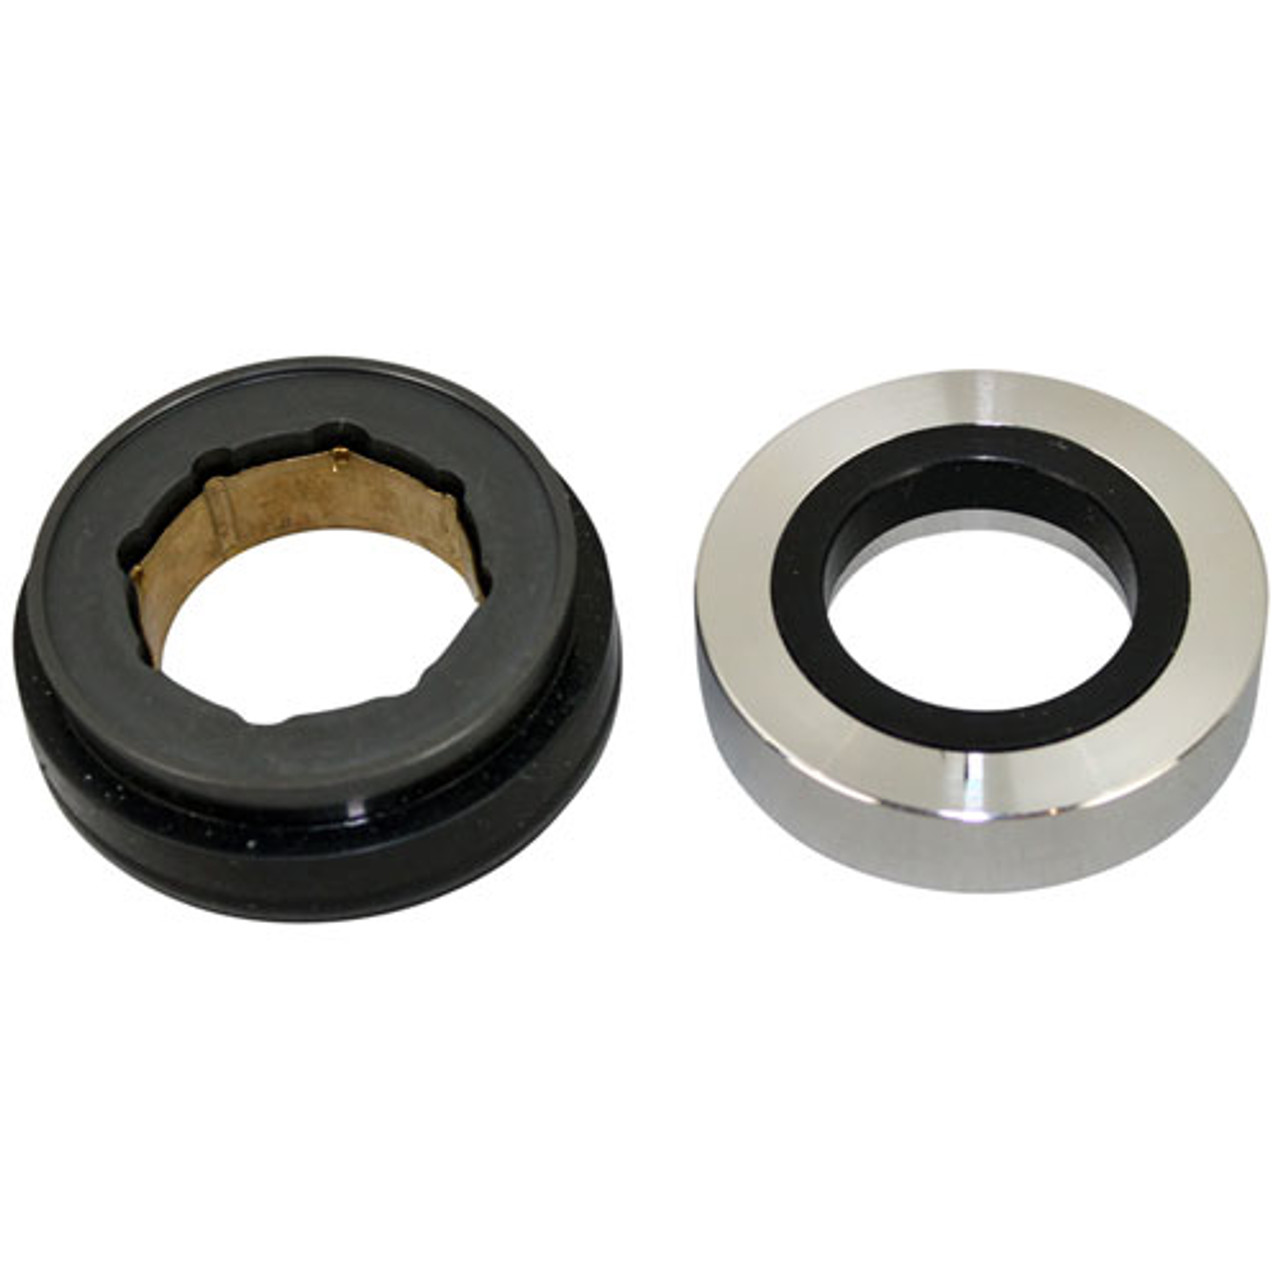 Pump Seal - Replacement Part For Blakeslee 02255